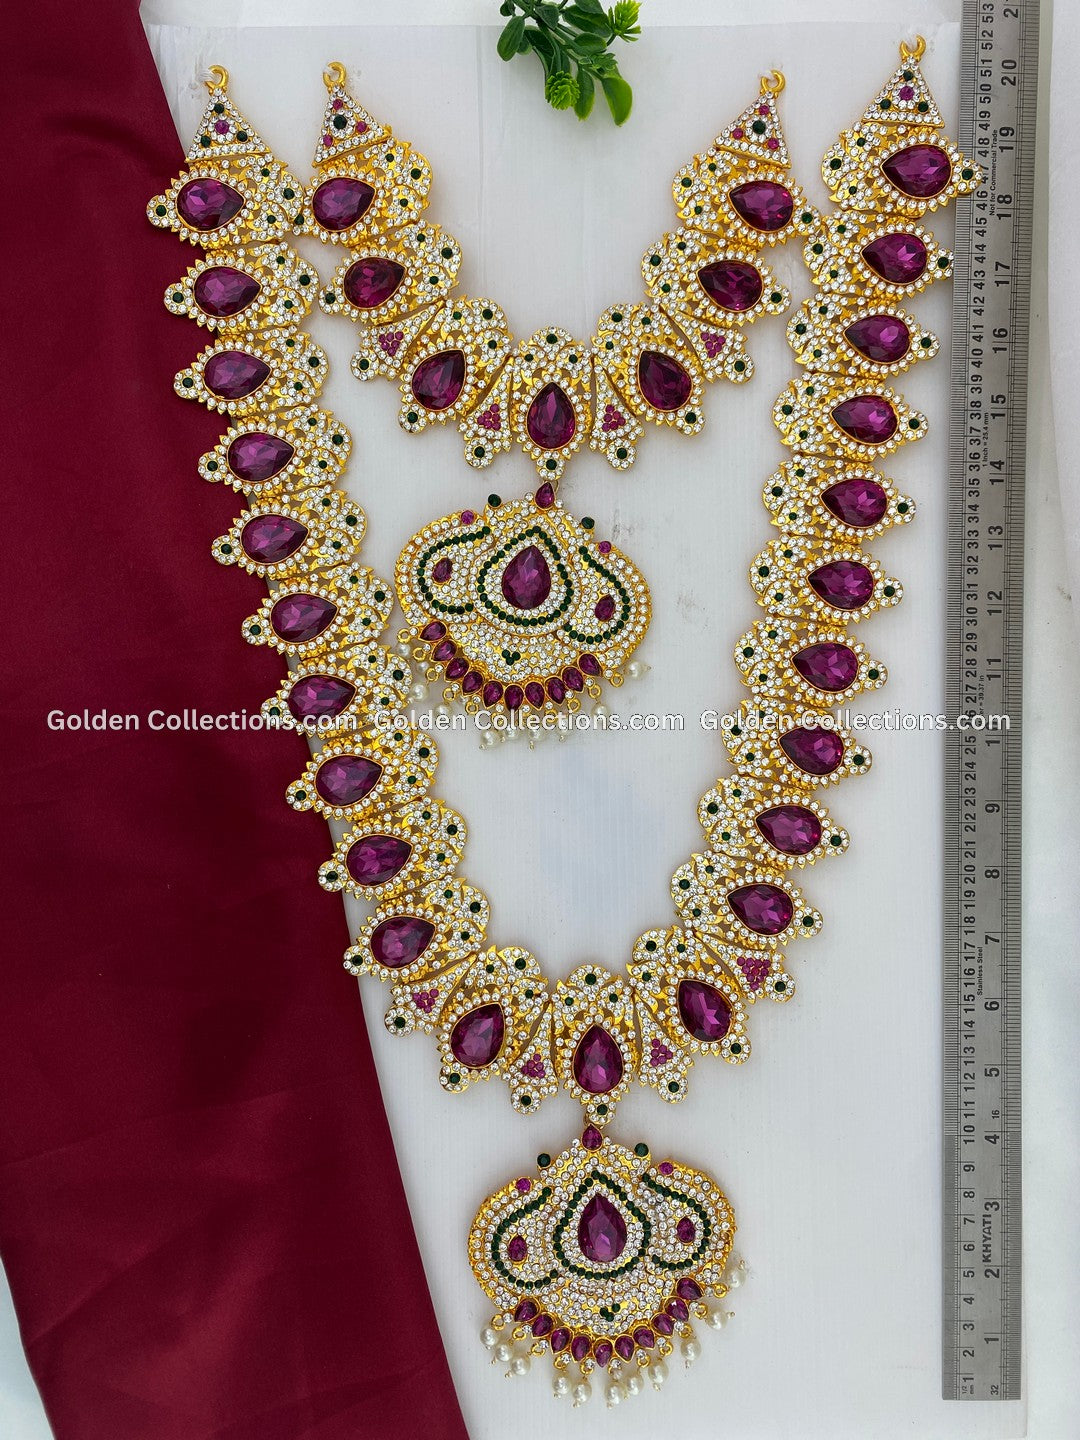 Shop Now Browse Deity Jewellery Online - GoldenCollections 2